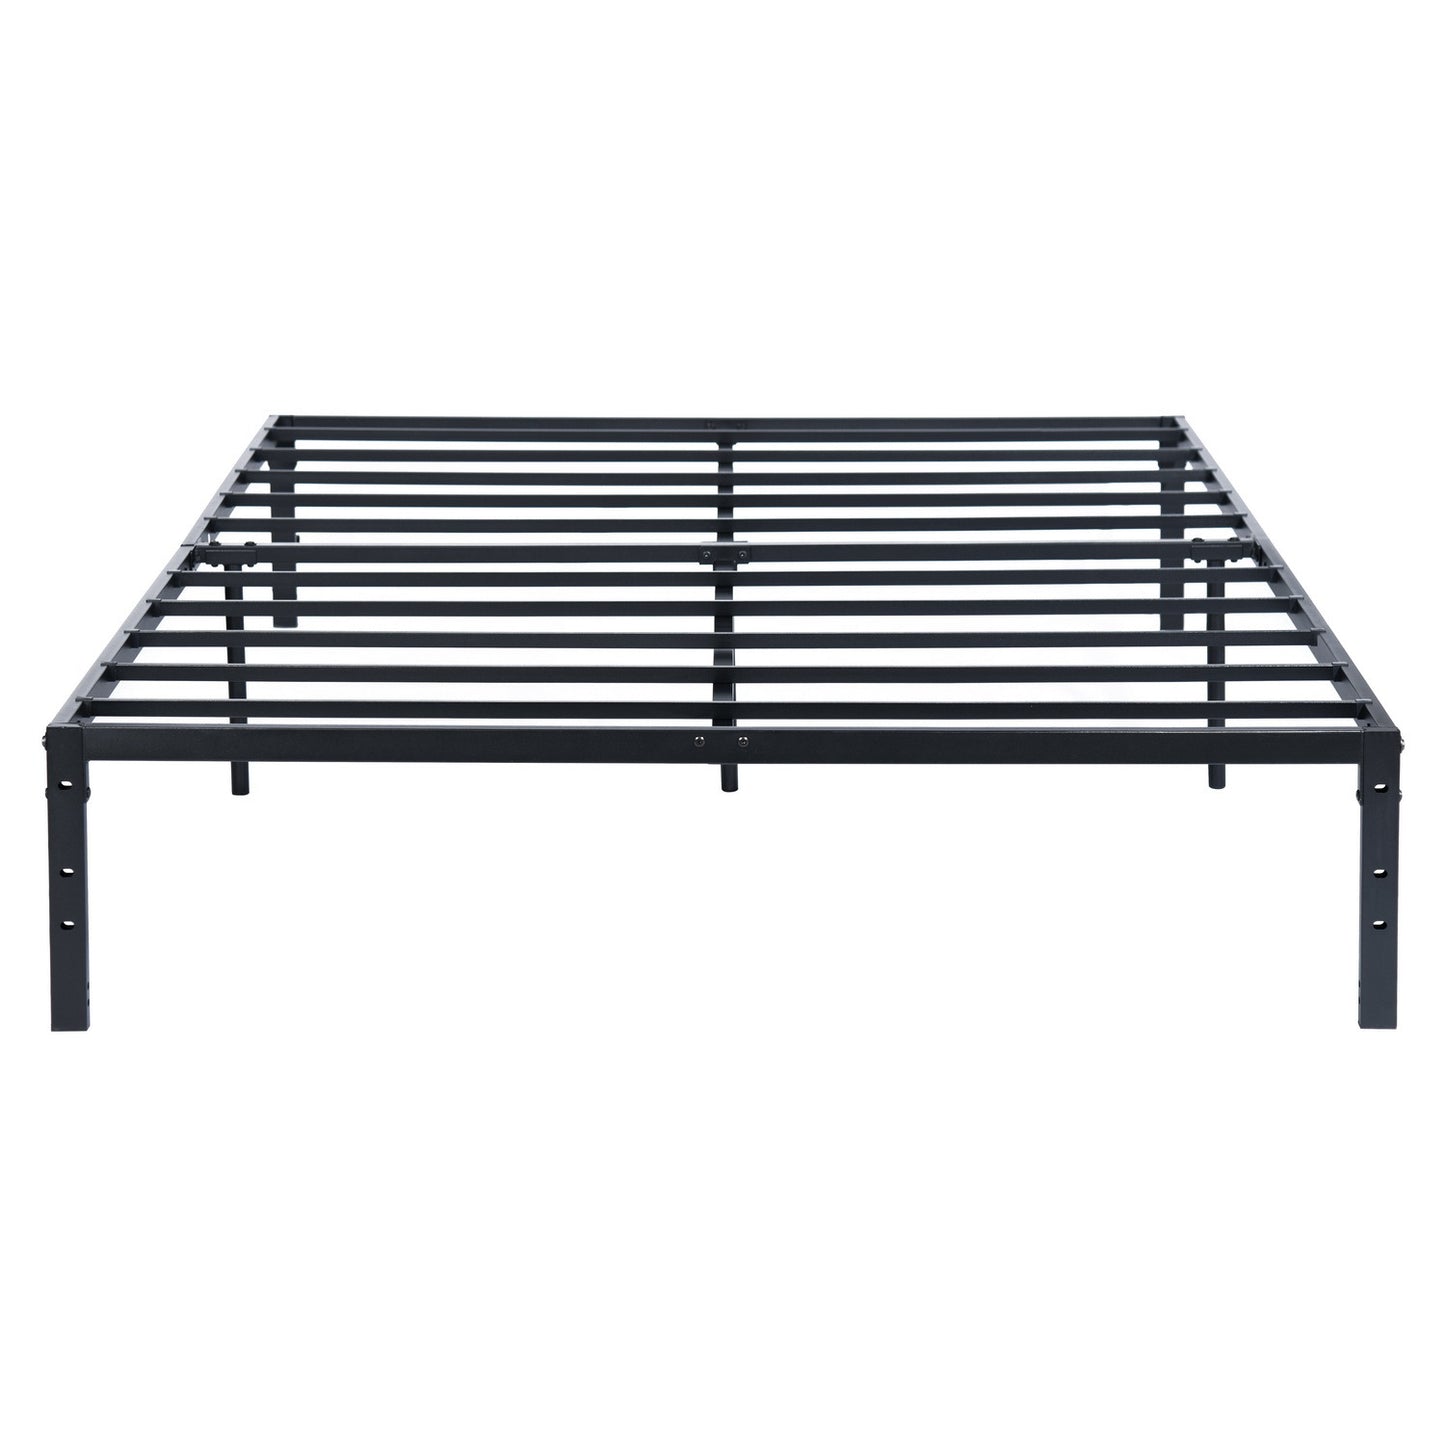 Modern Full Metal Queen Size Bed with Slat Support - NO Mattress - No Box Spring Needed